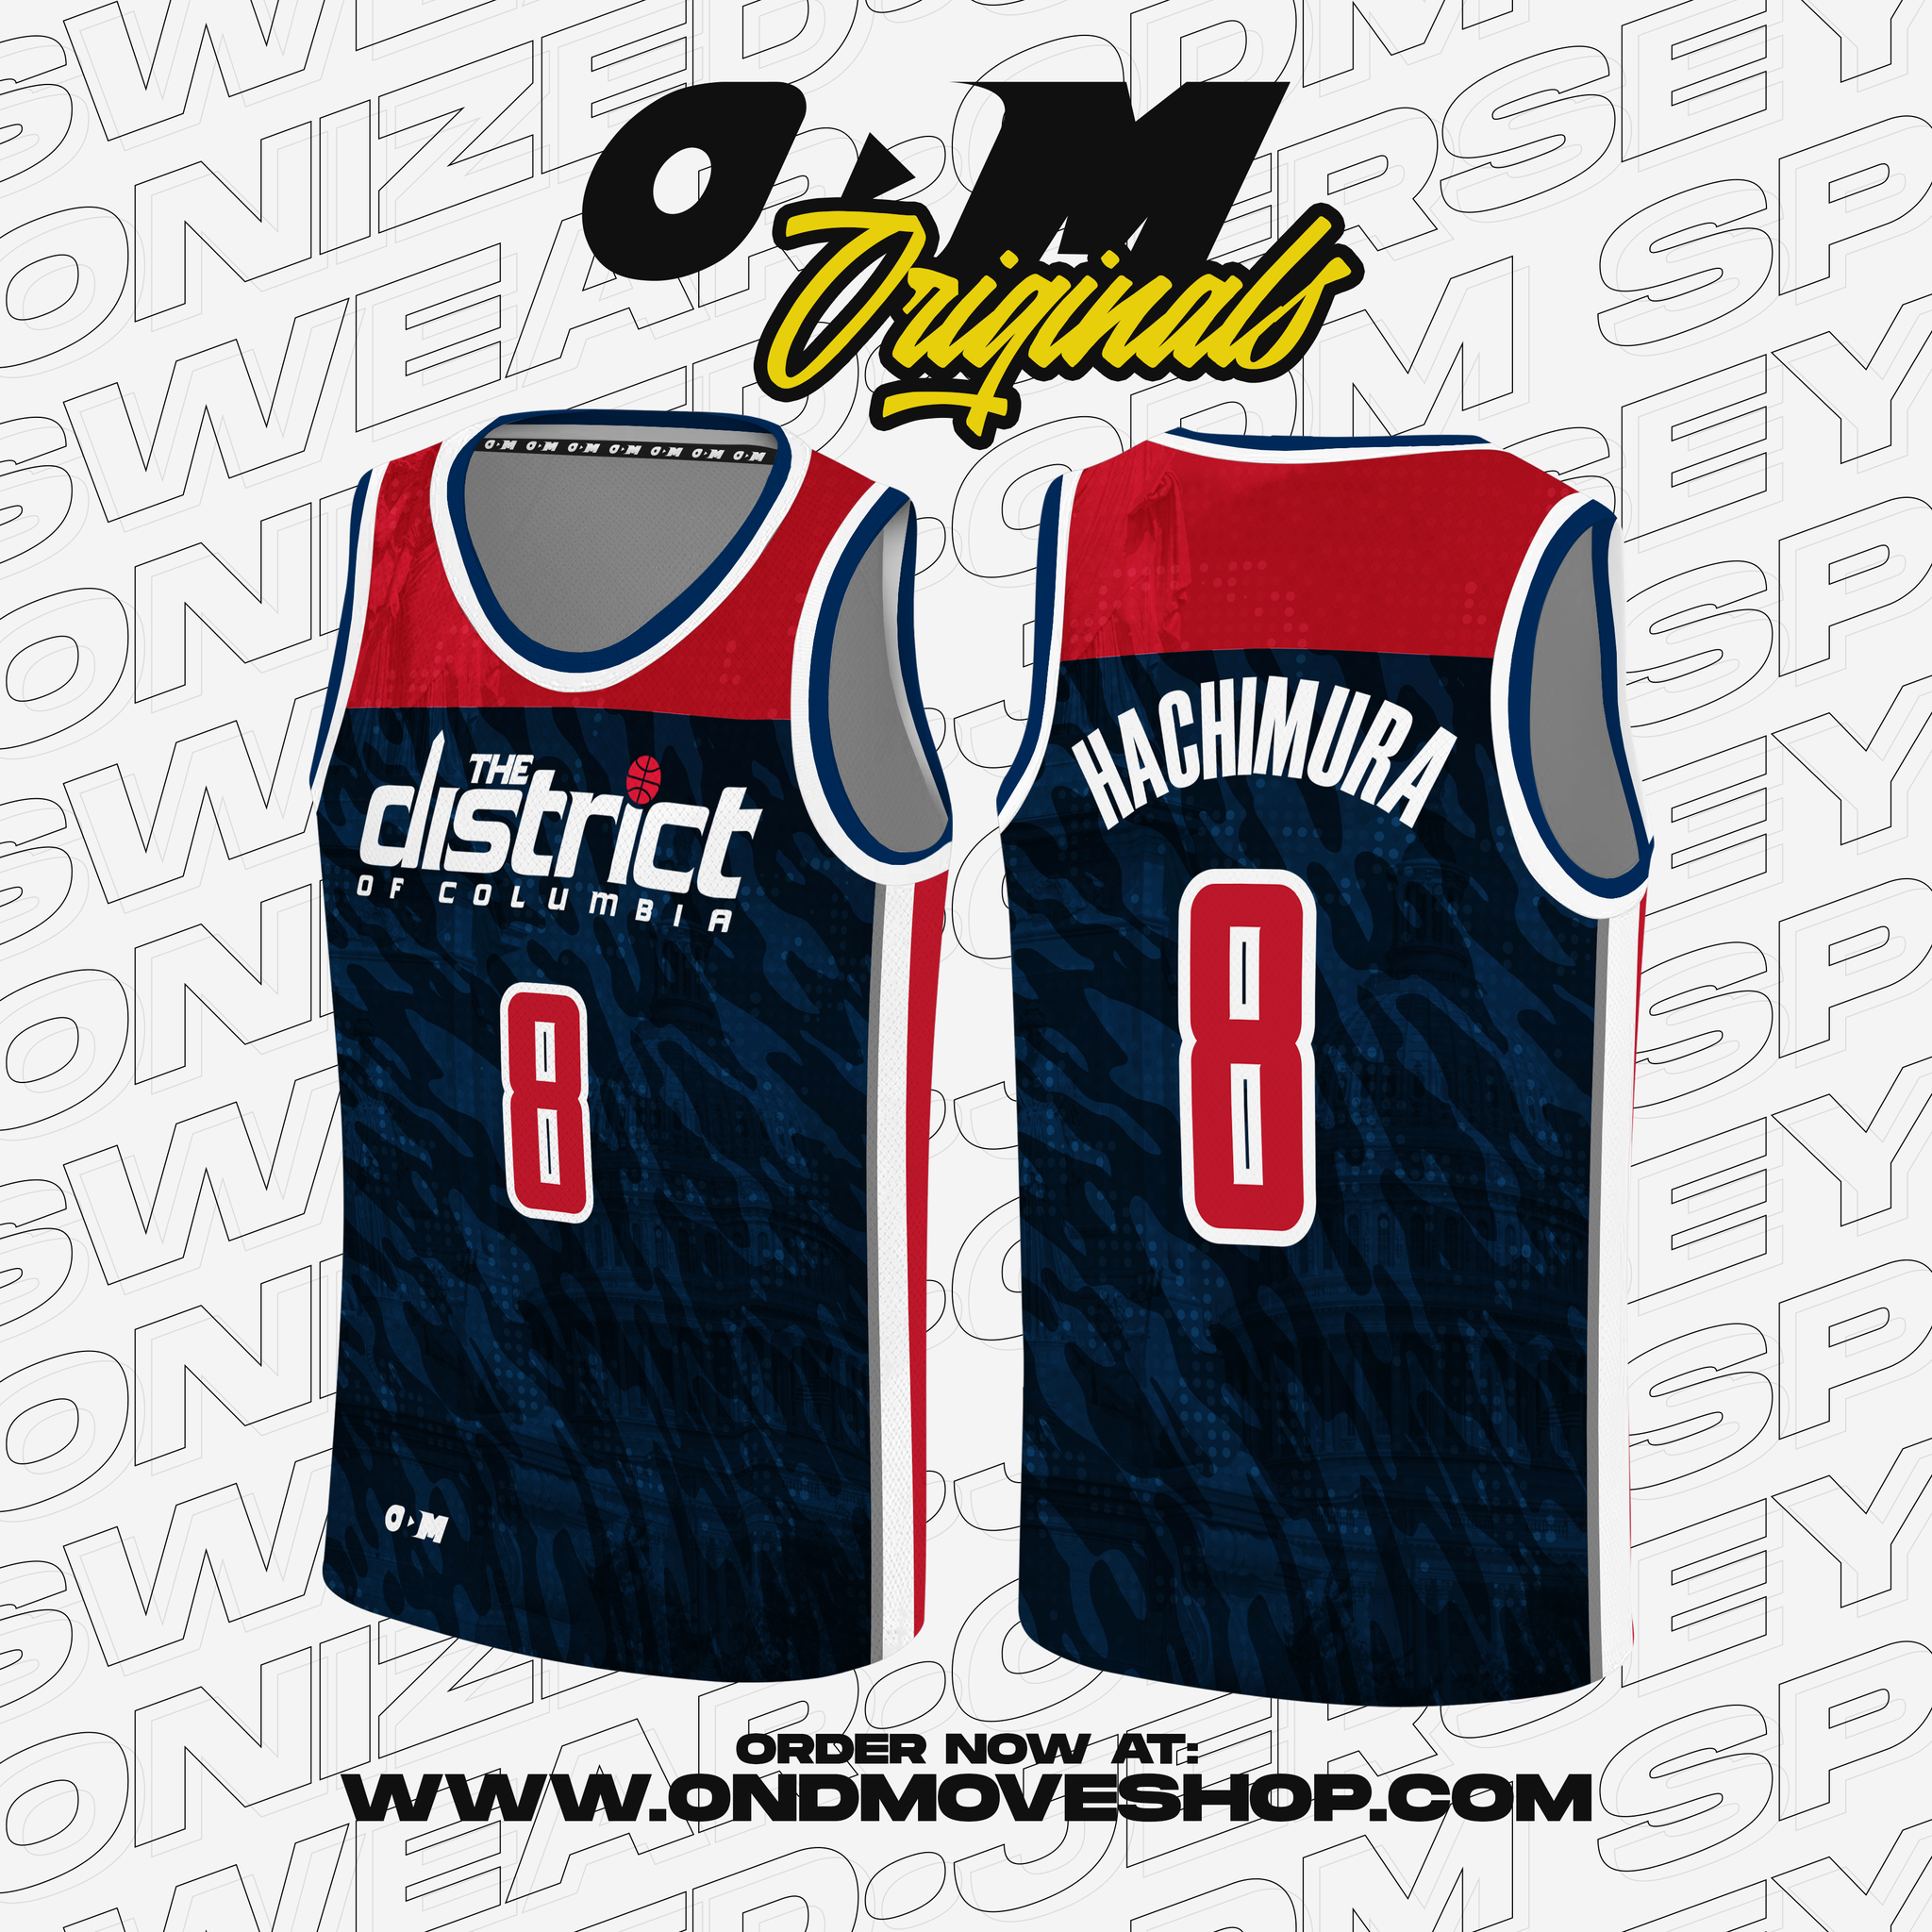 THE DISTRICT WIZARDS JERSEY